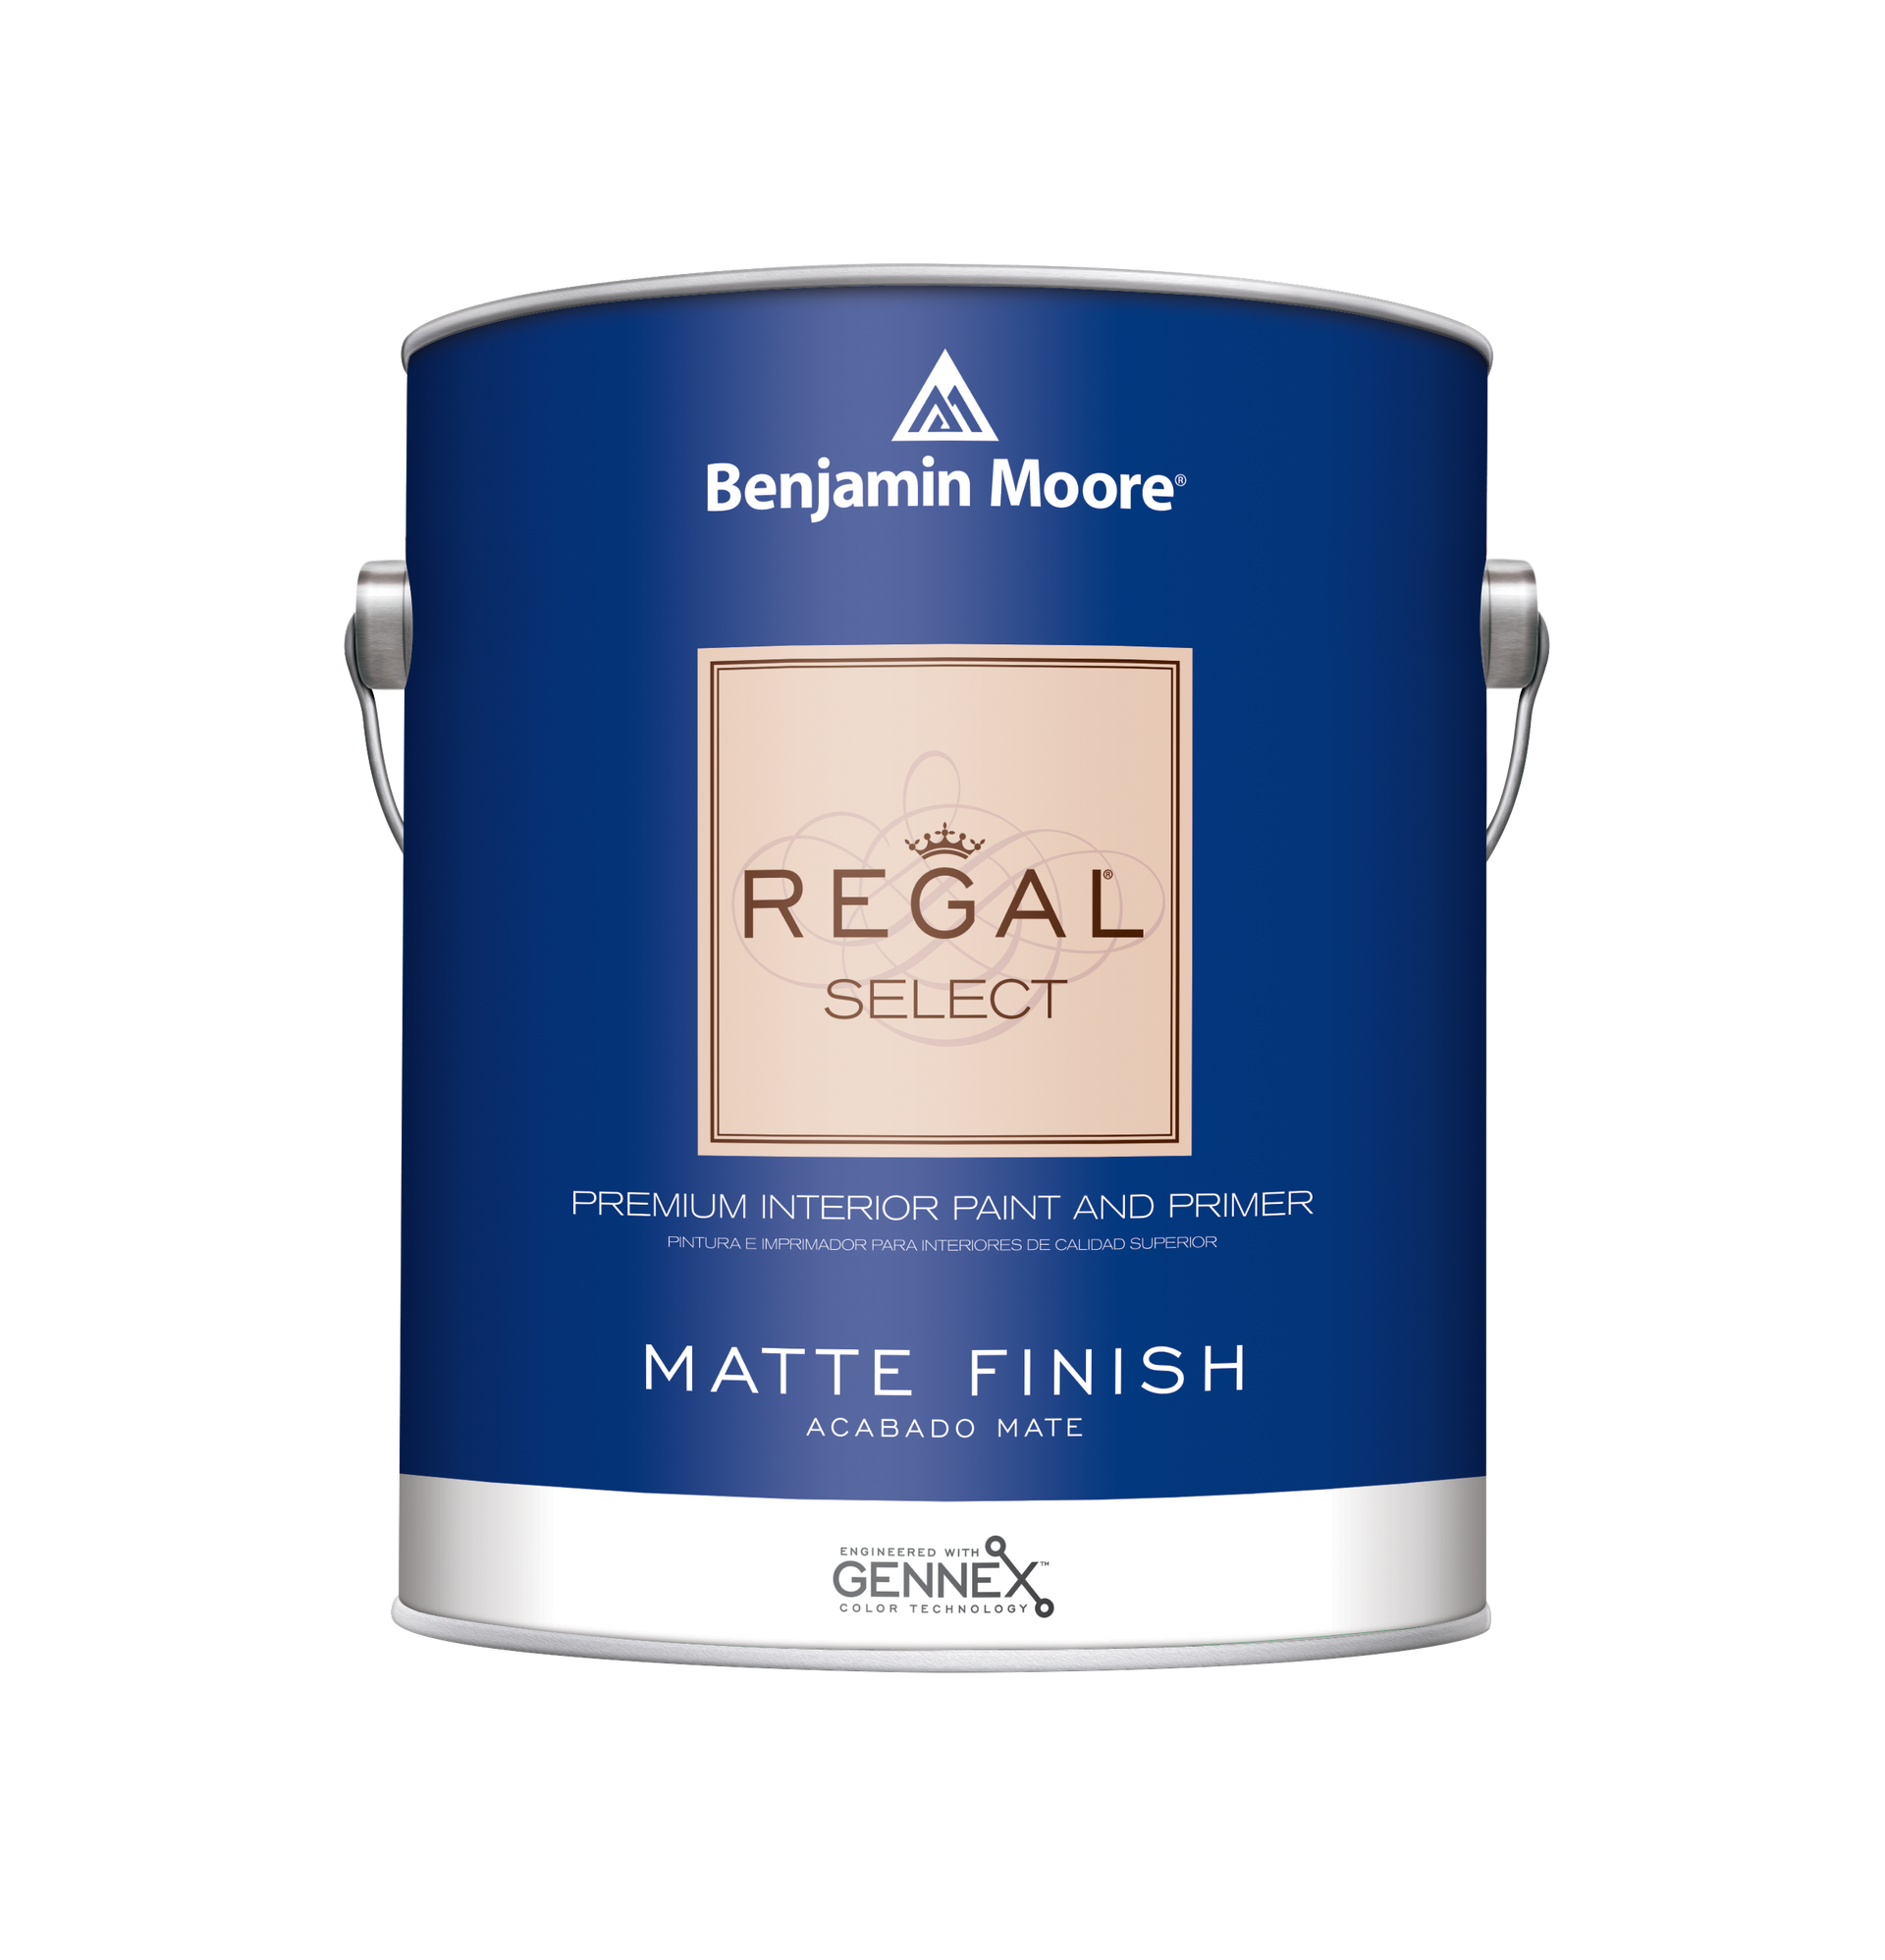 Image of can of Regal® Select Interior Paint